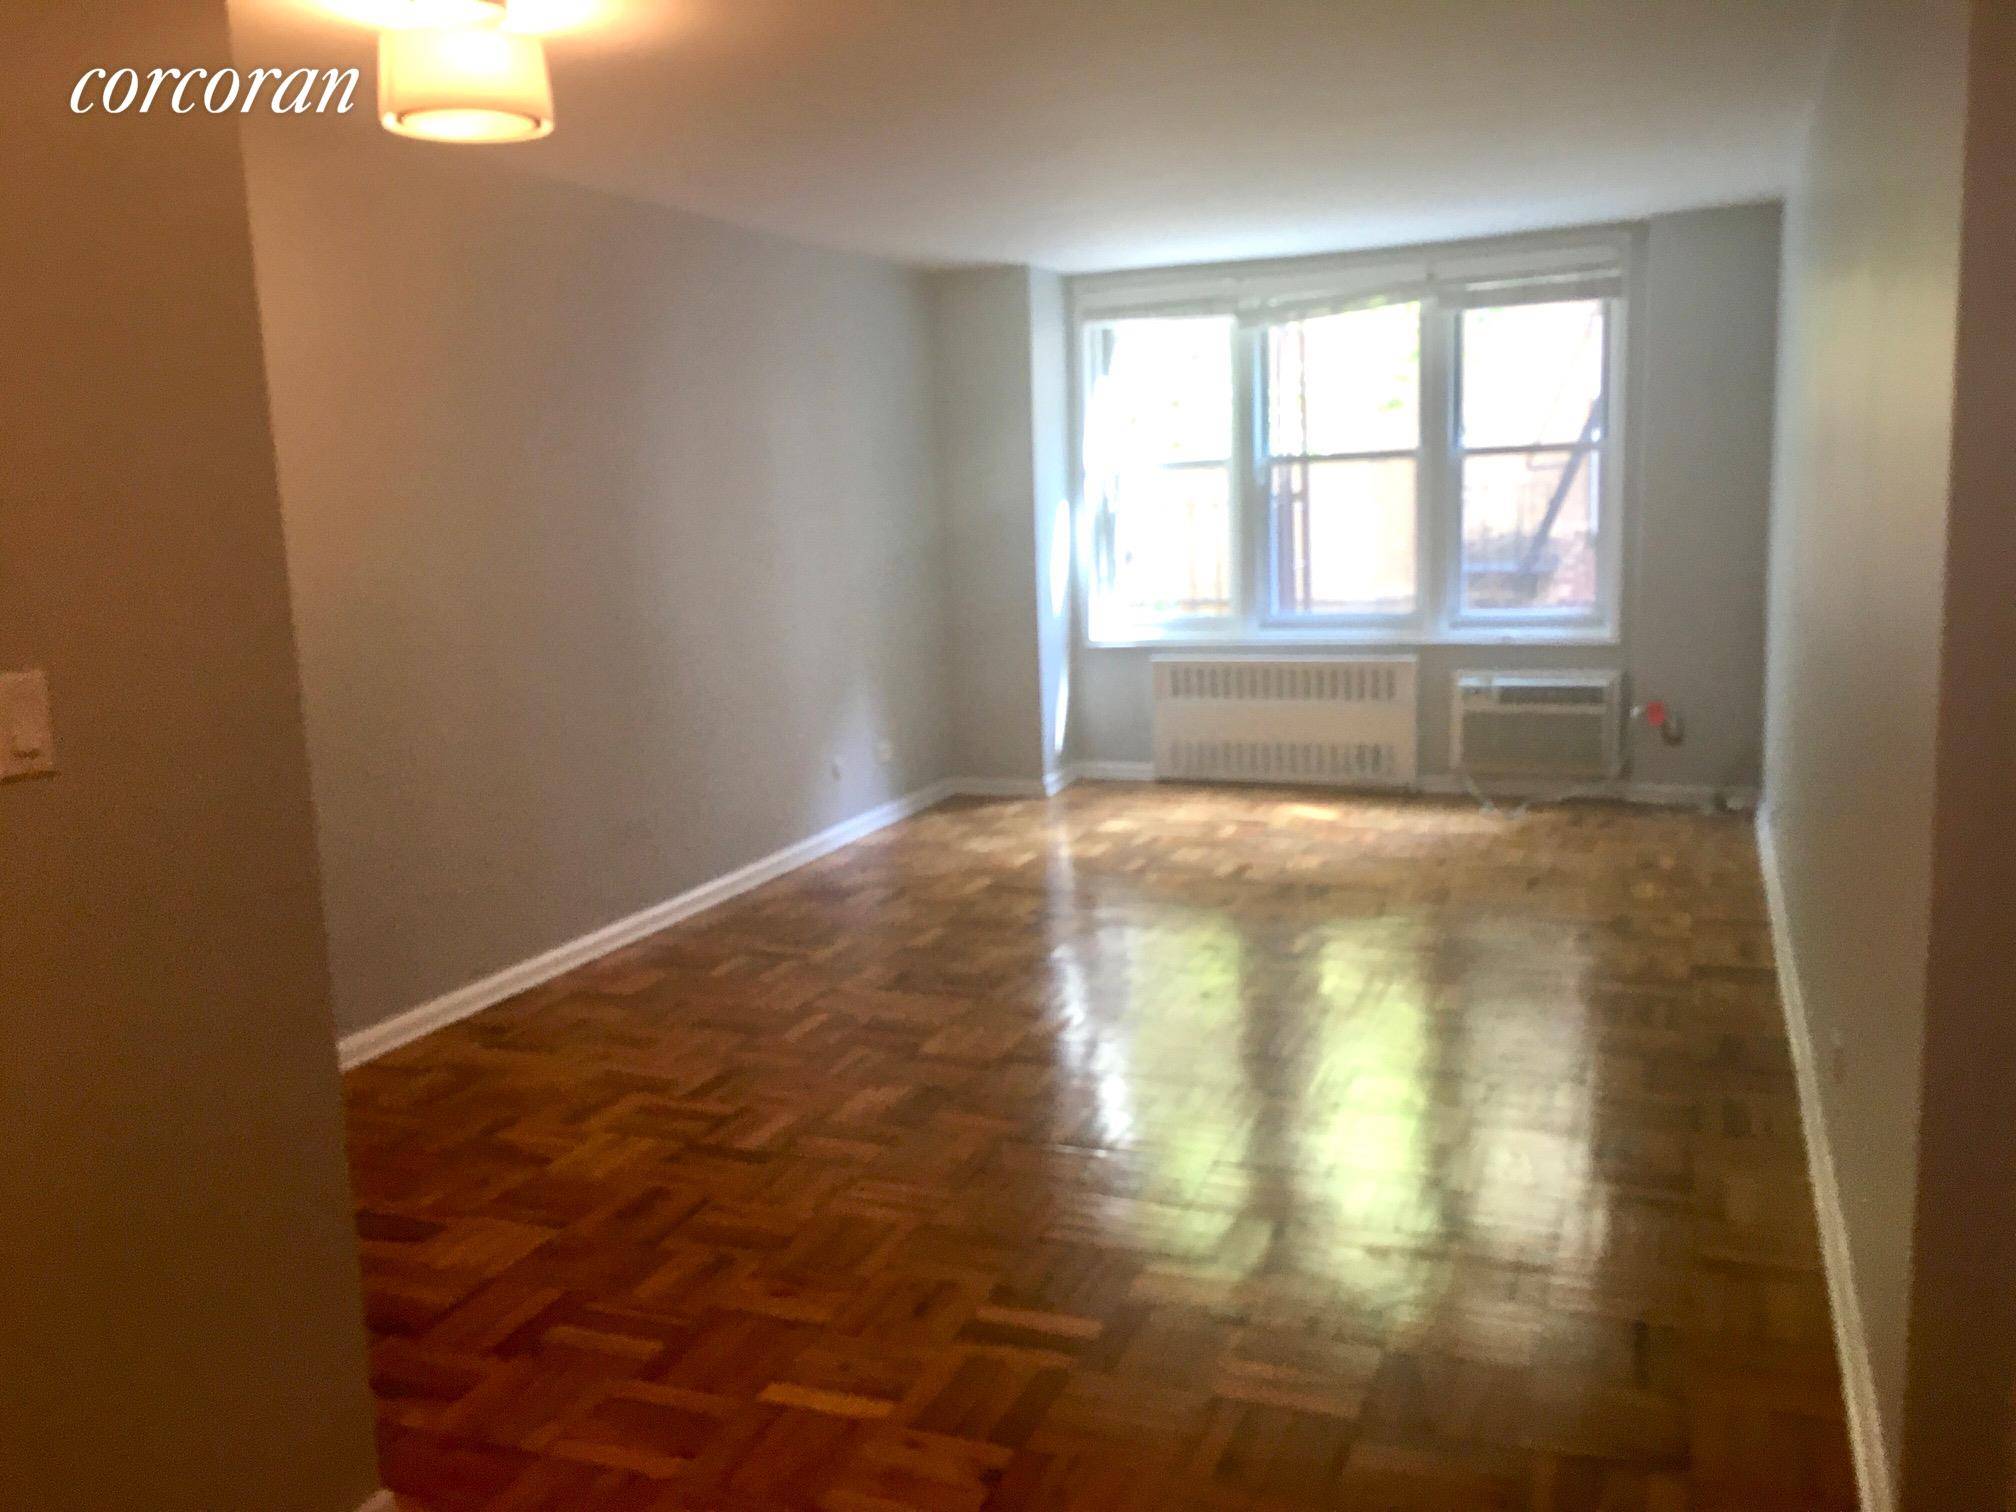 GREAT DEAL NO Fee co brokers CYOF This is a lovely, quiet, 2nd floor one bedroom that has undergone a mint renovation.